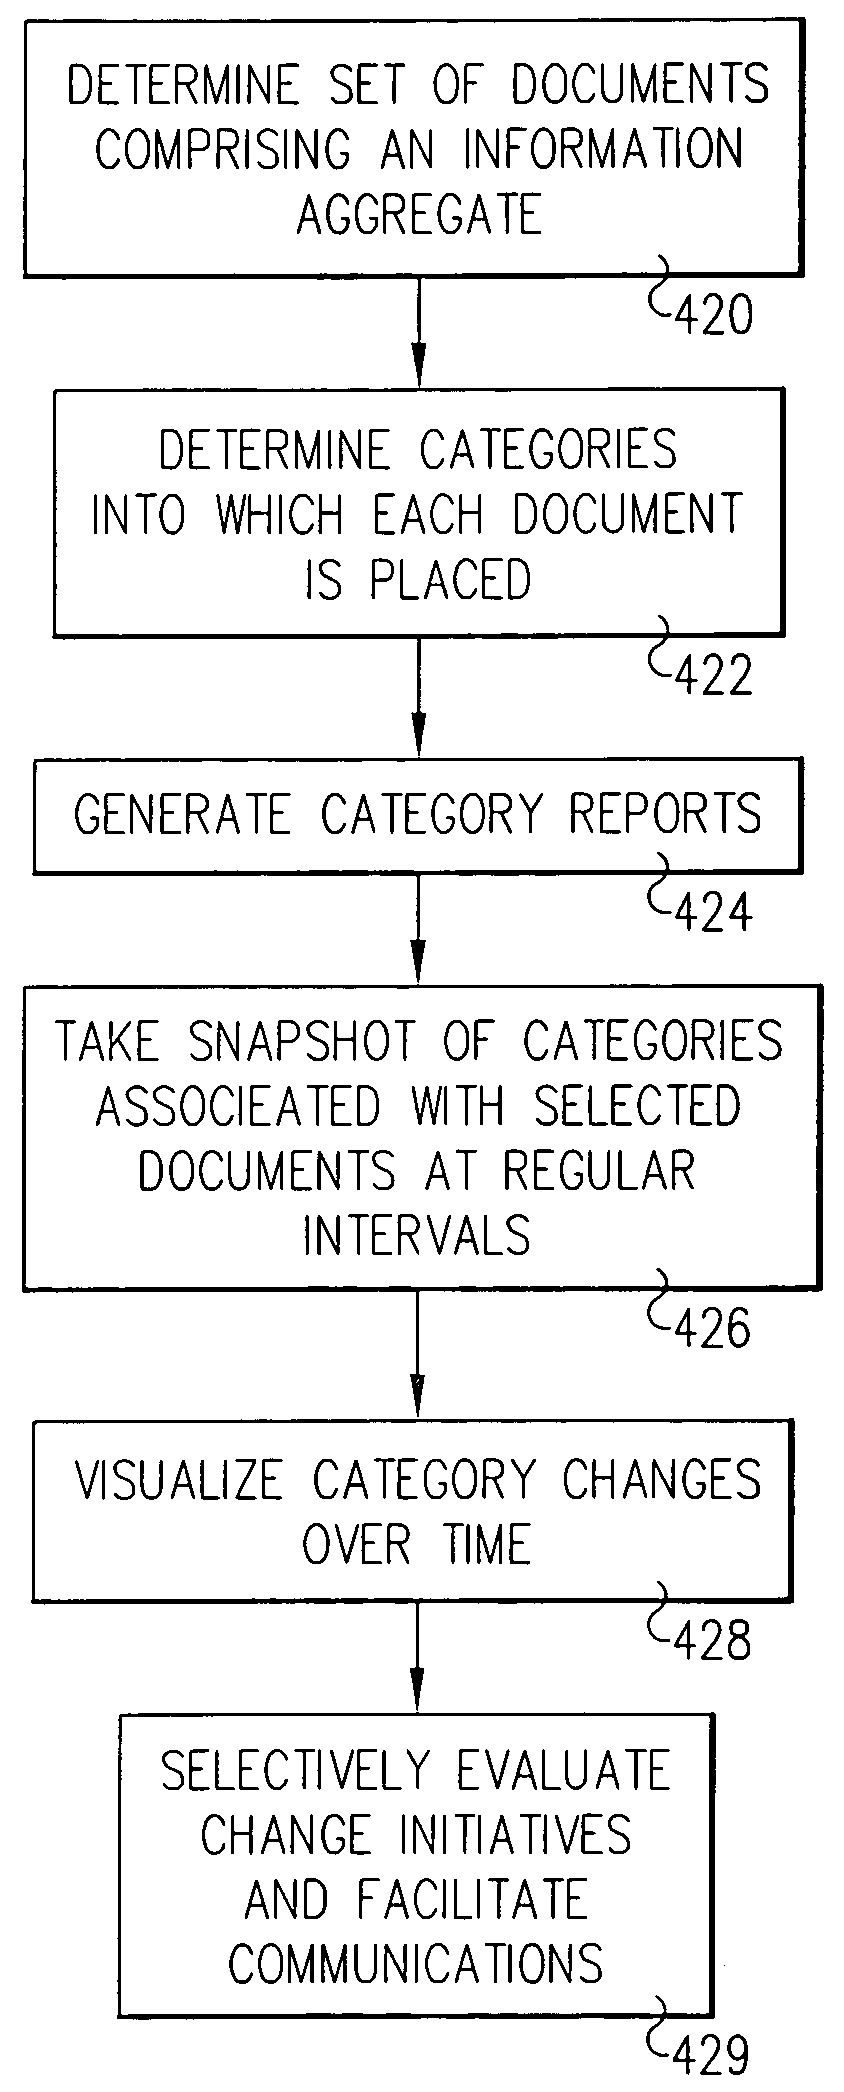 System and method for evaluating information aggregates by visualizing associated categories